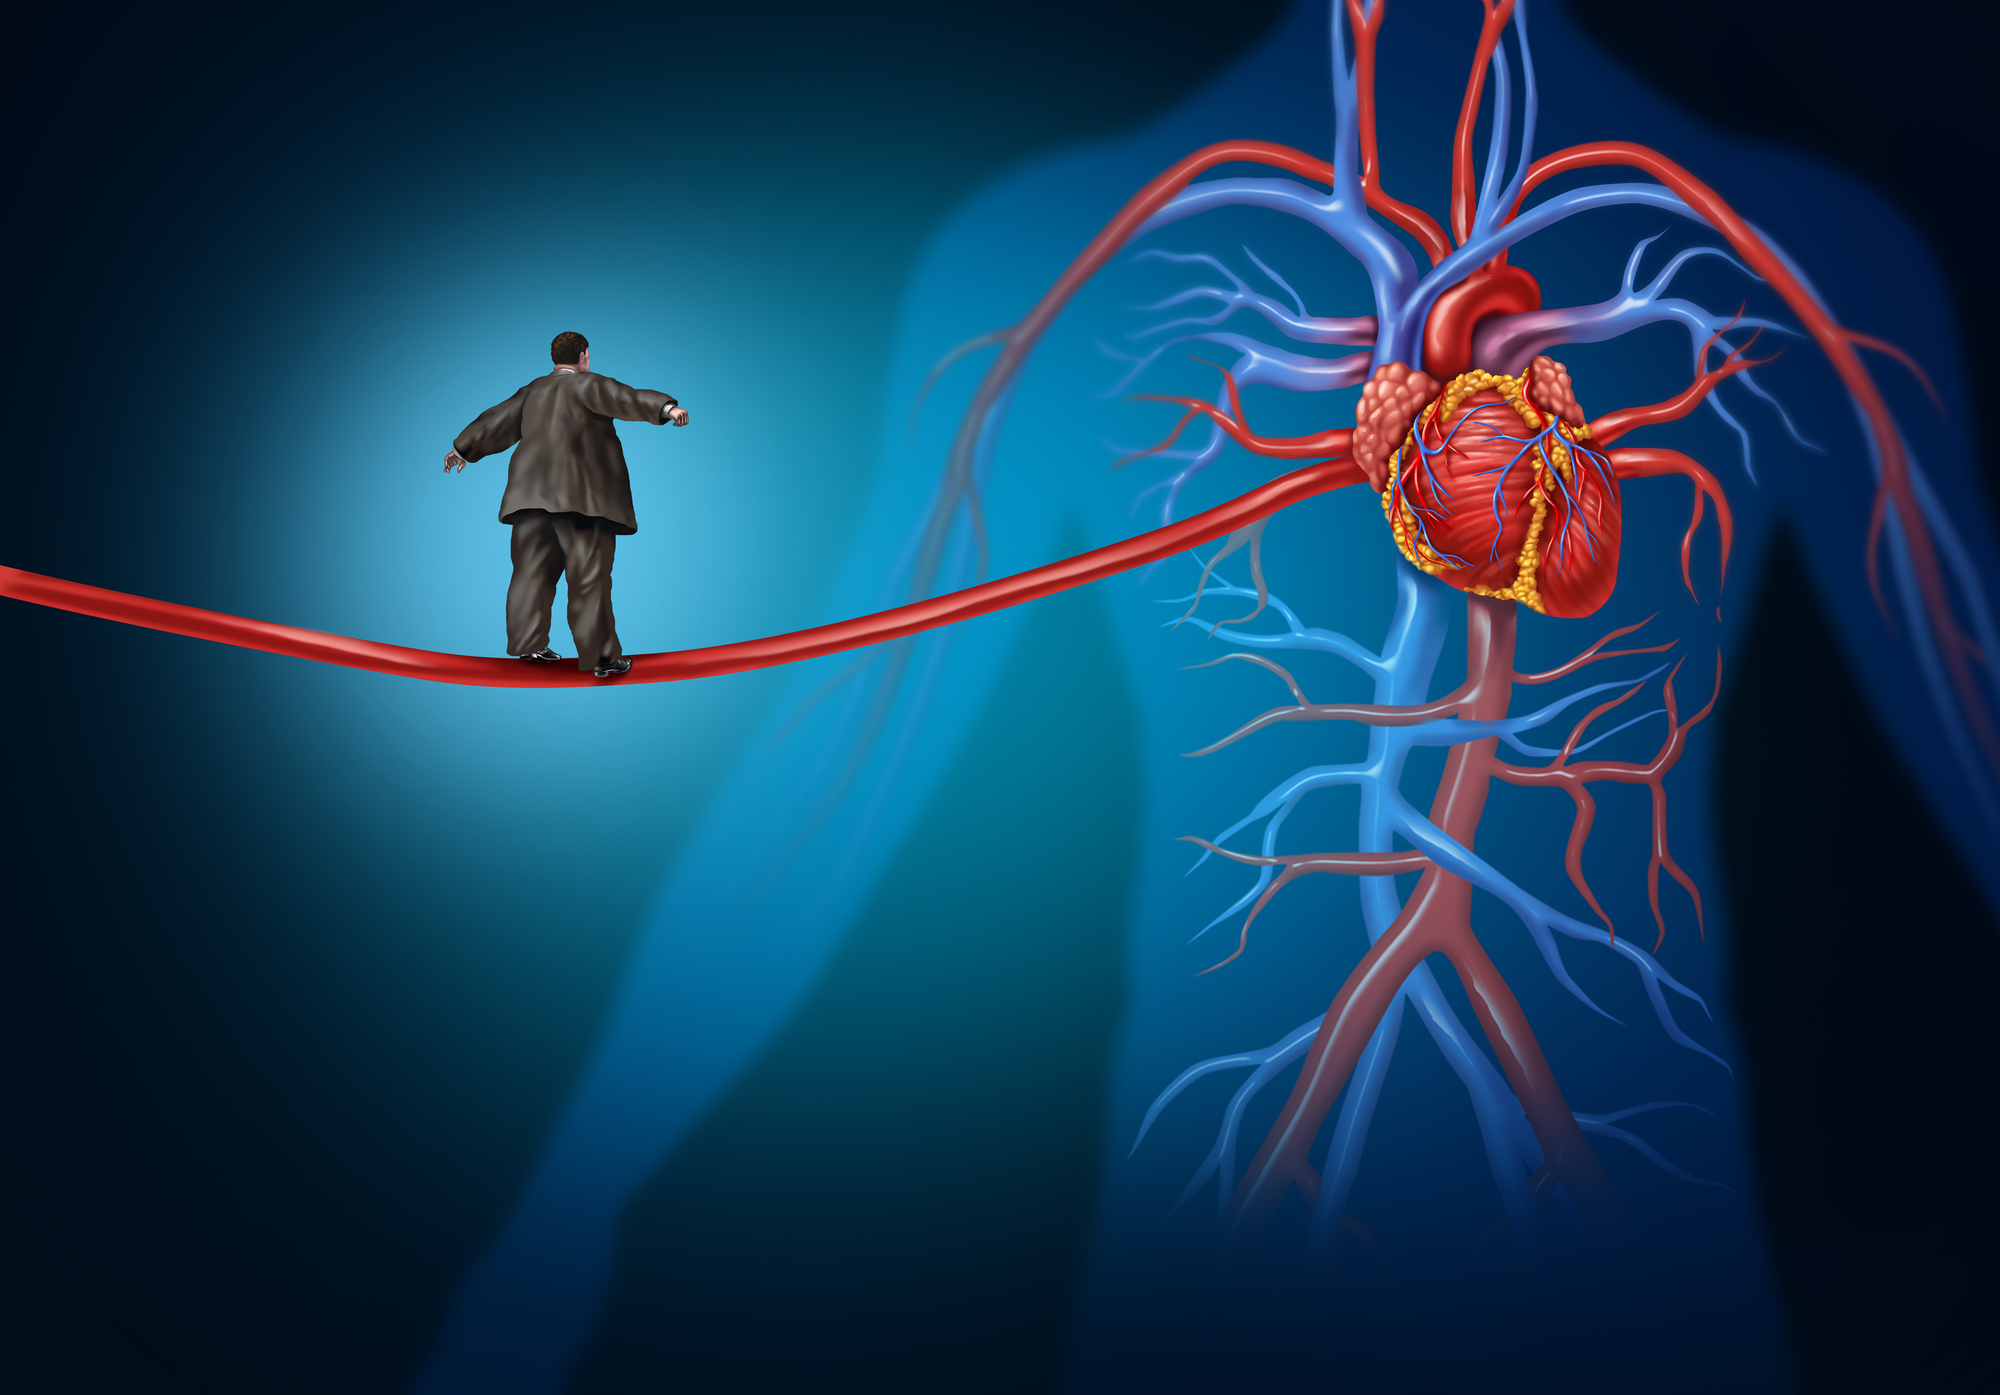 The link between obesity and cardiovascular disease